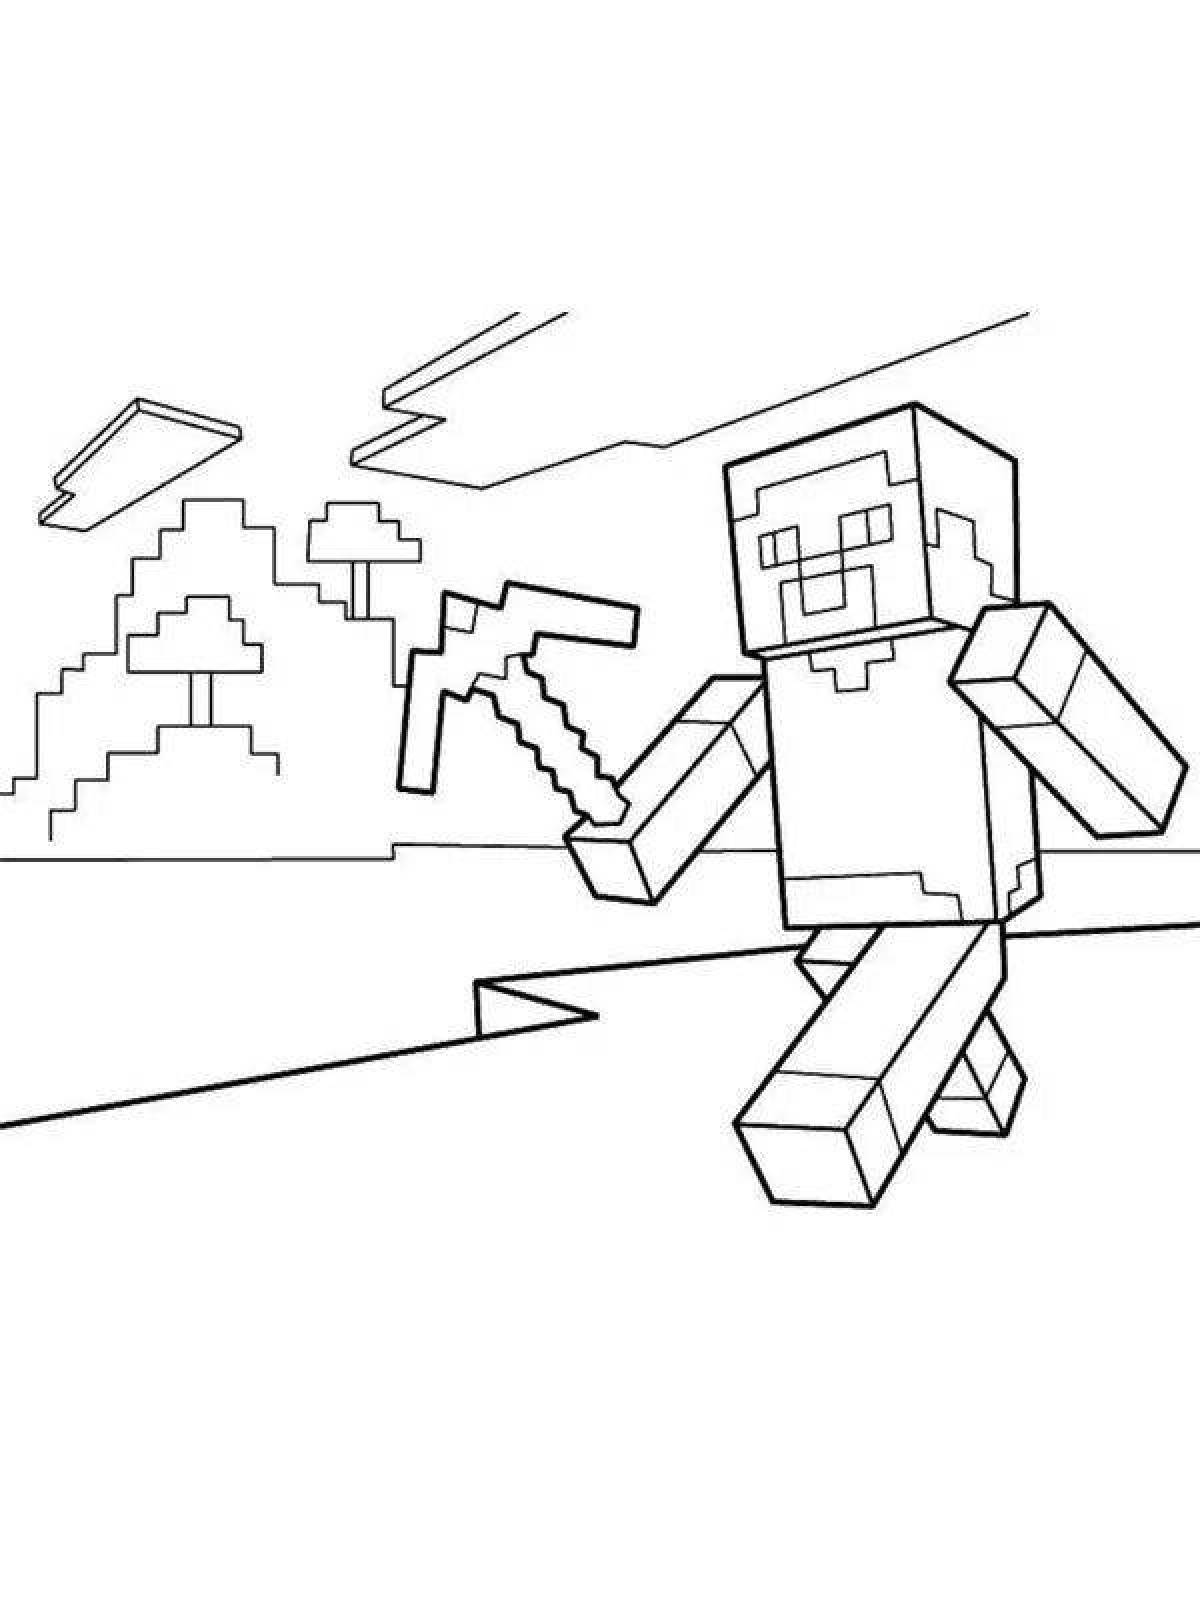 Playful minecraft man coloring page